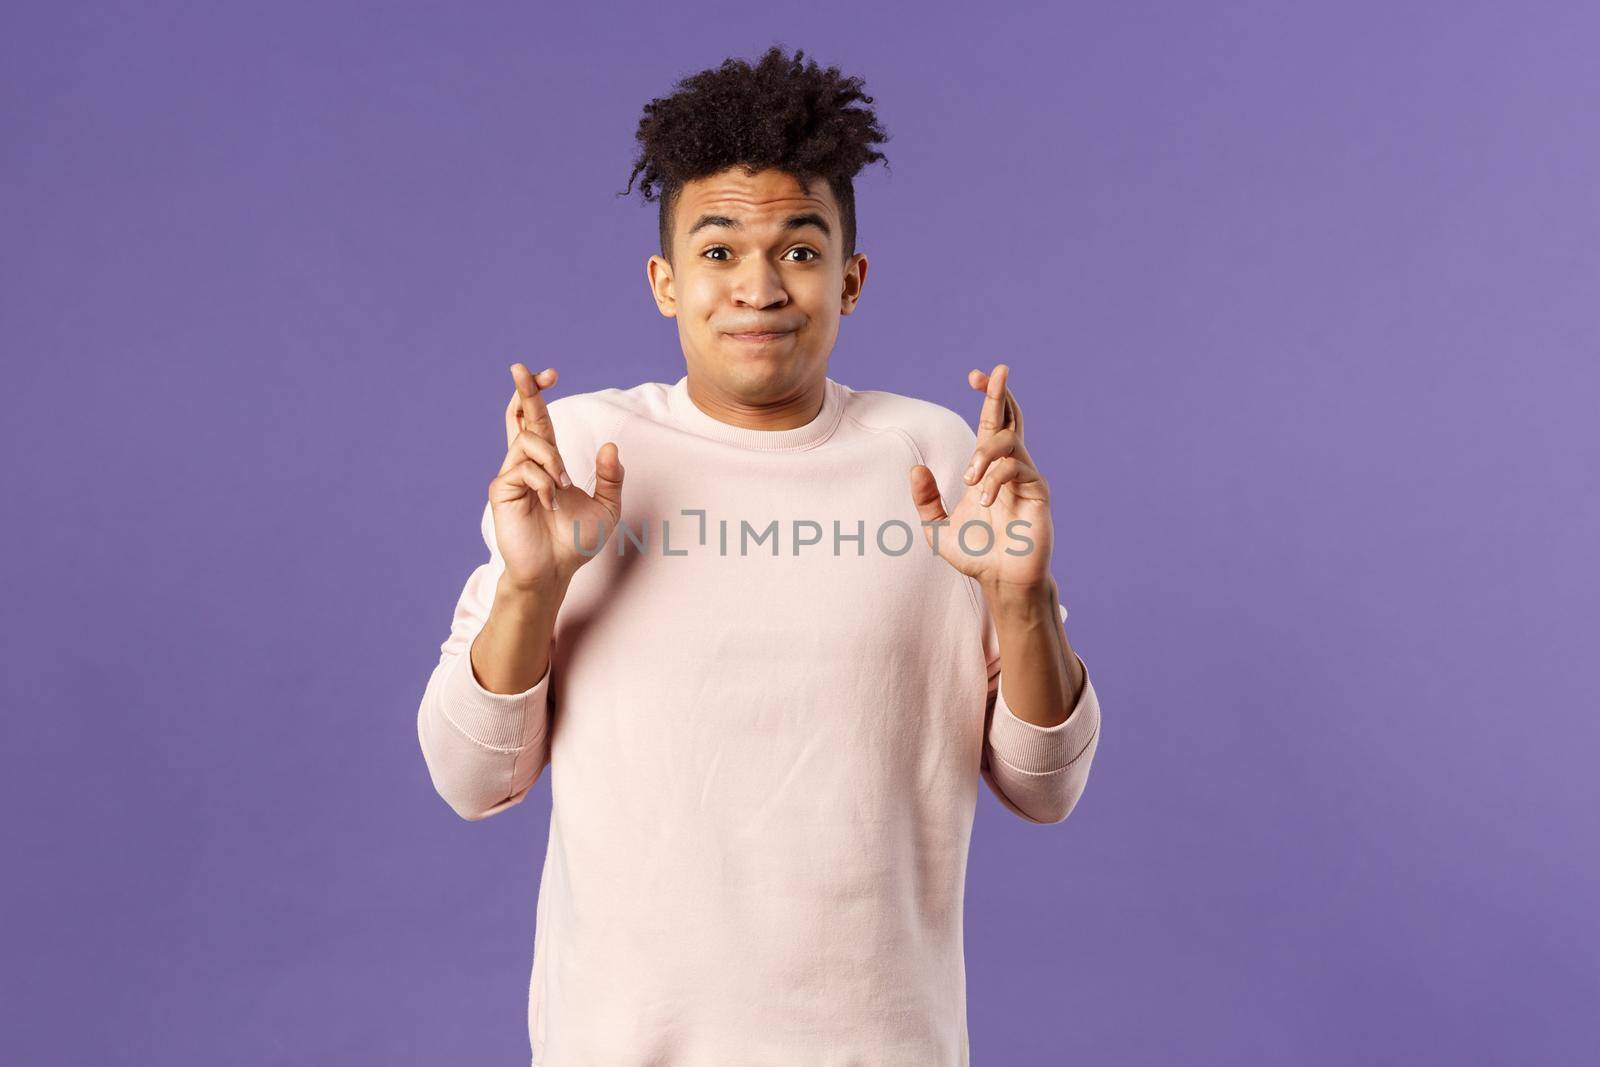 Portrait of young hopeful handsome man with dreads ancitipating something good happen, cross fingers good luck, smiling with joy and optimism, having faith, praying over purple background.